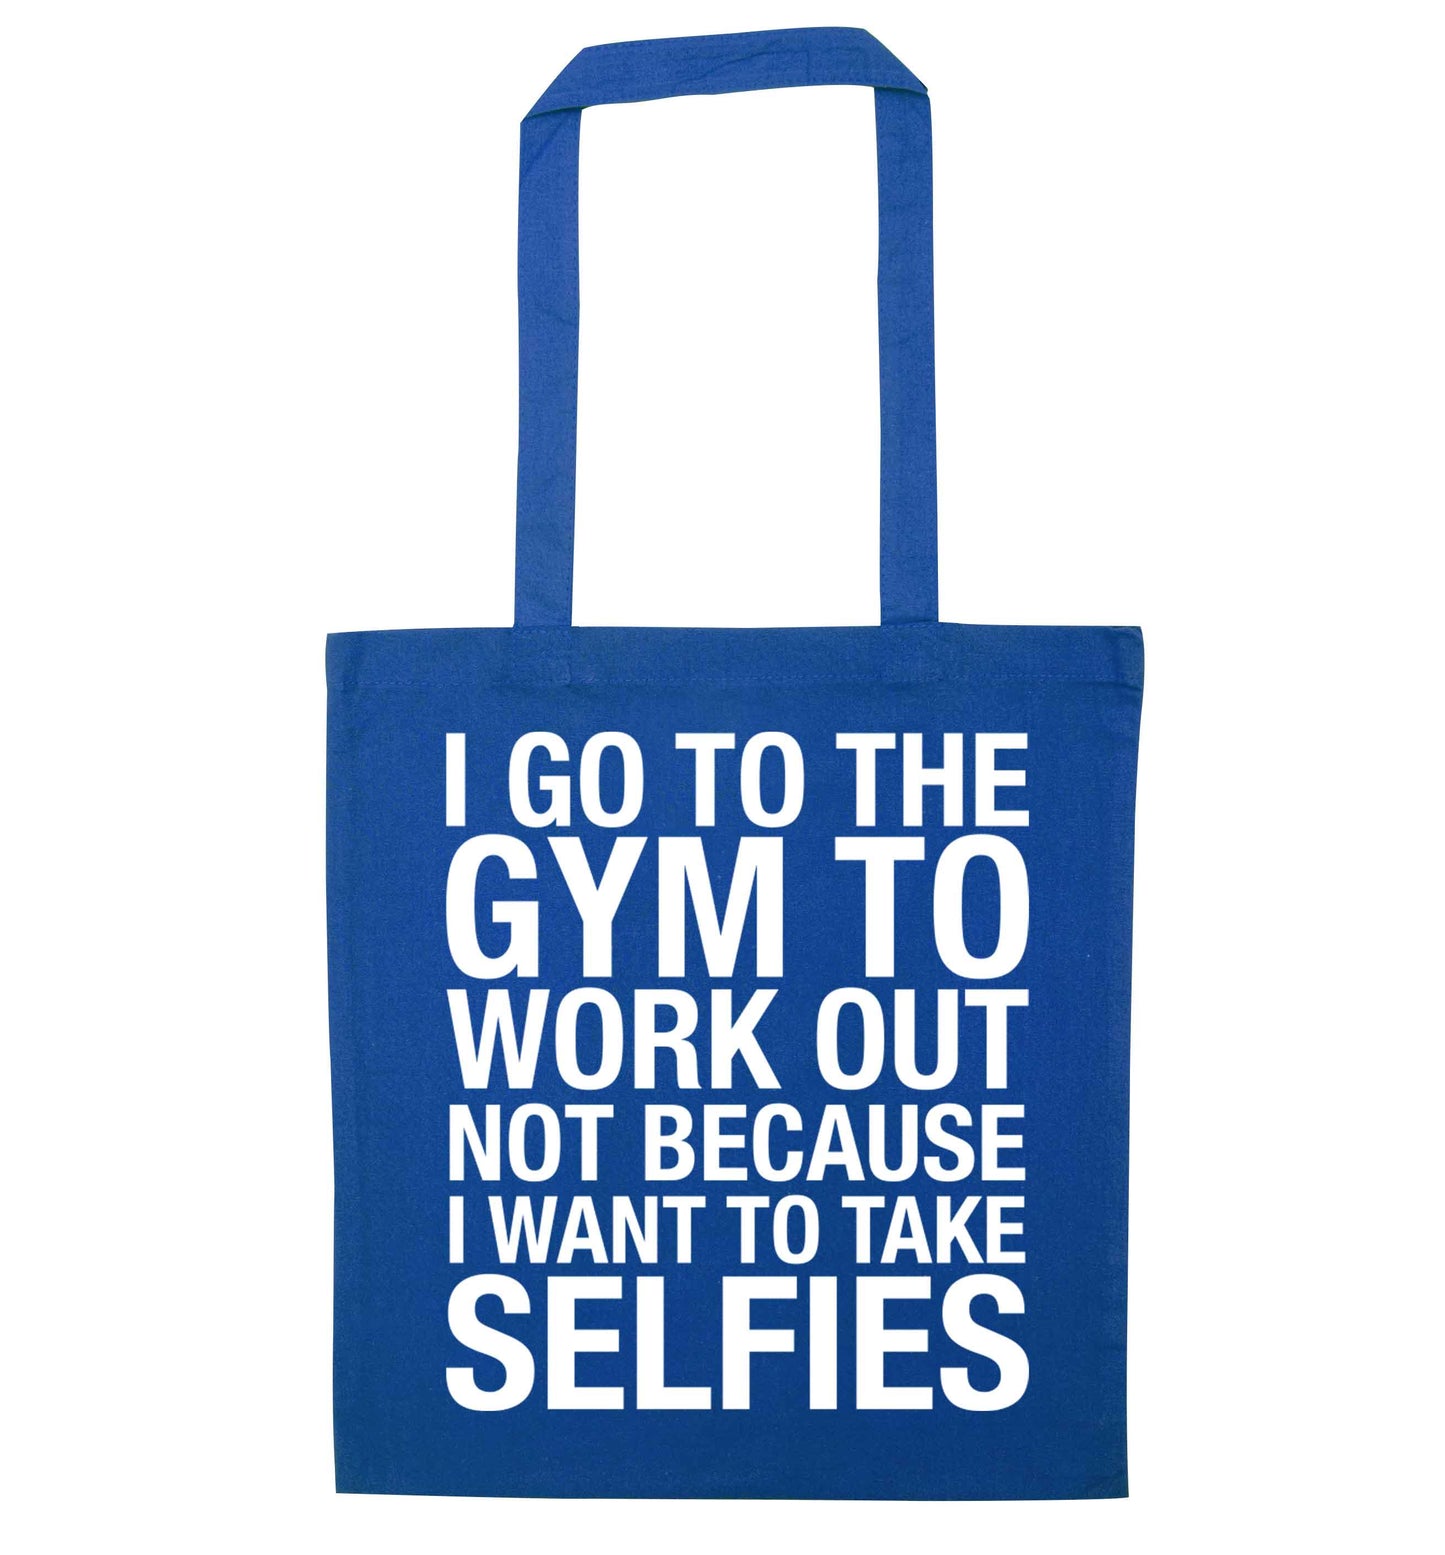 I go to the gym to workout not to take selfies blue tote bag